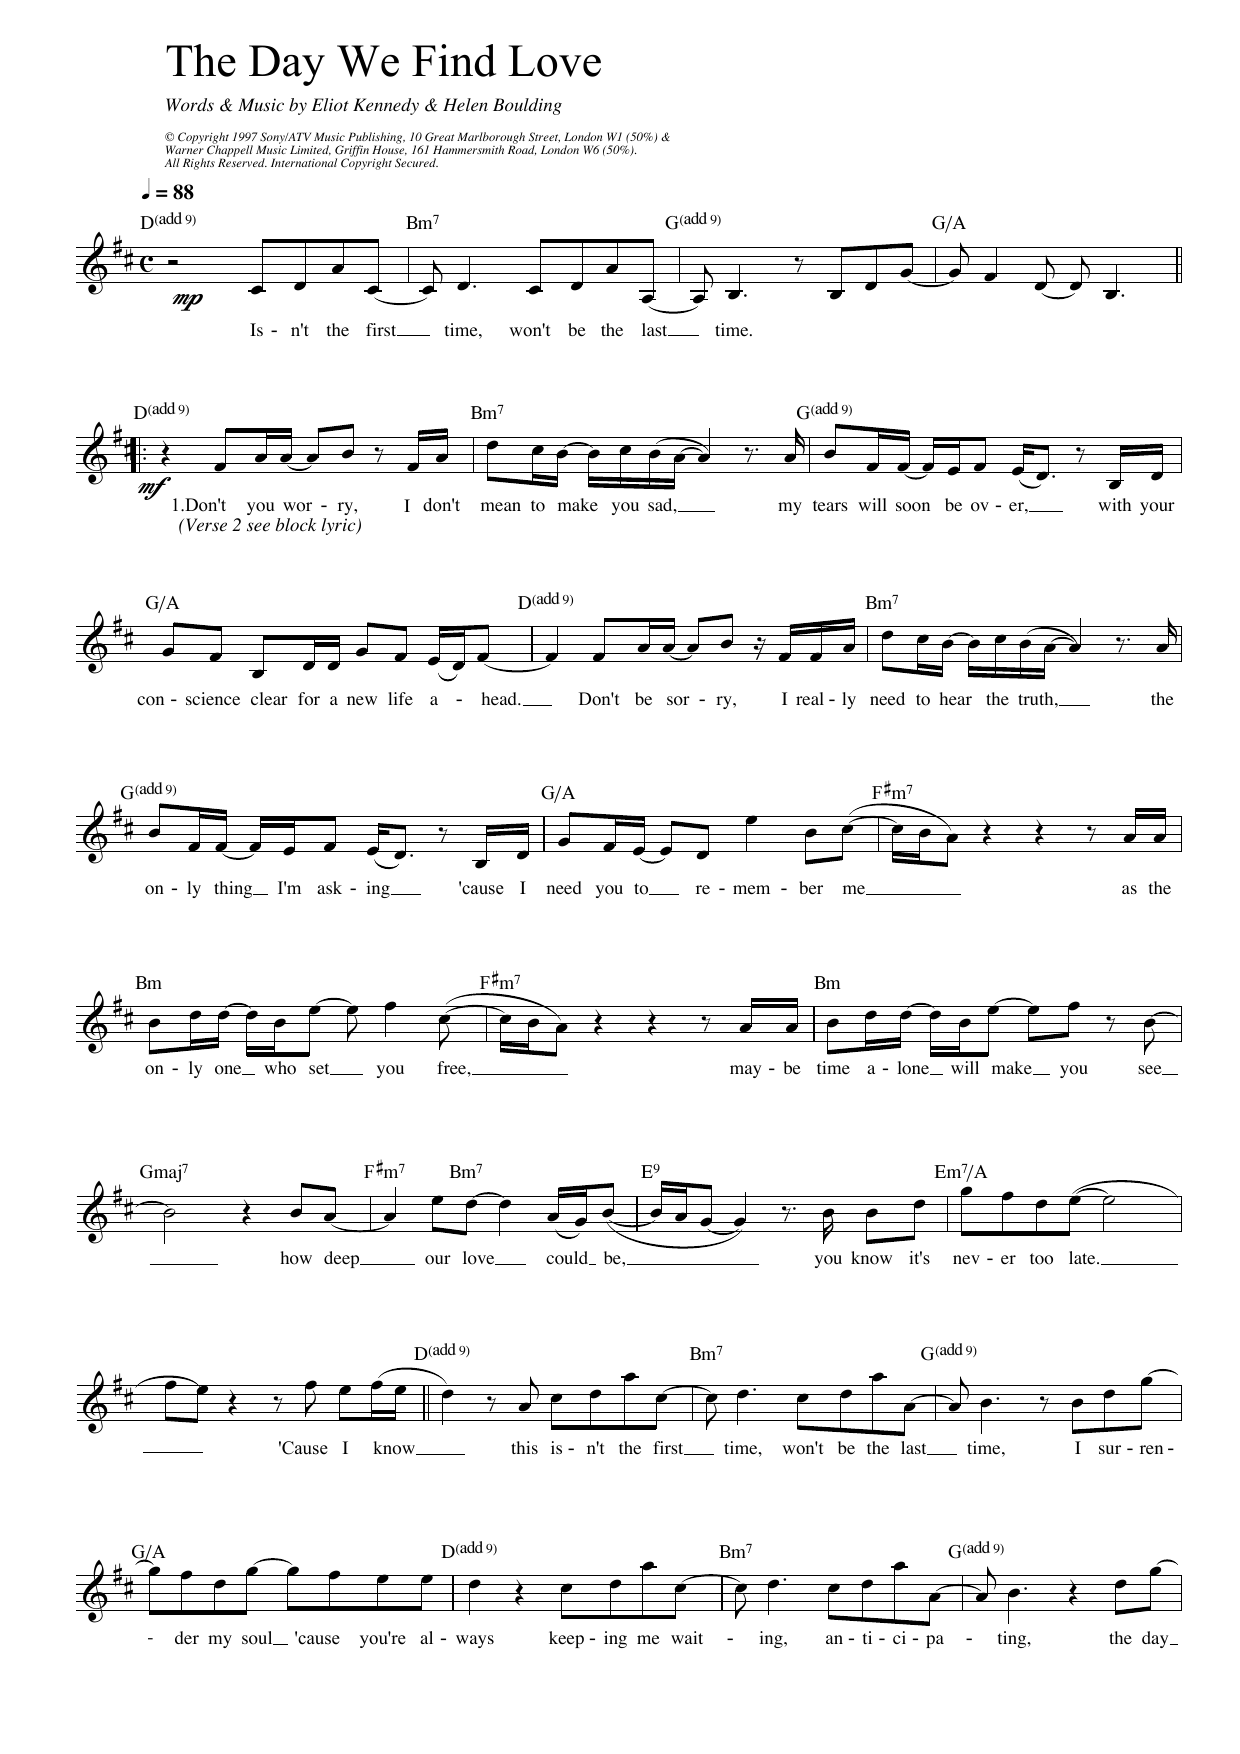 Download 911 The Day We Find Love Sheet Music